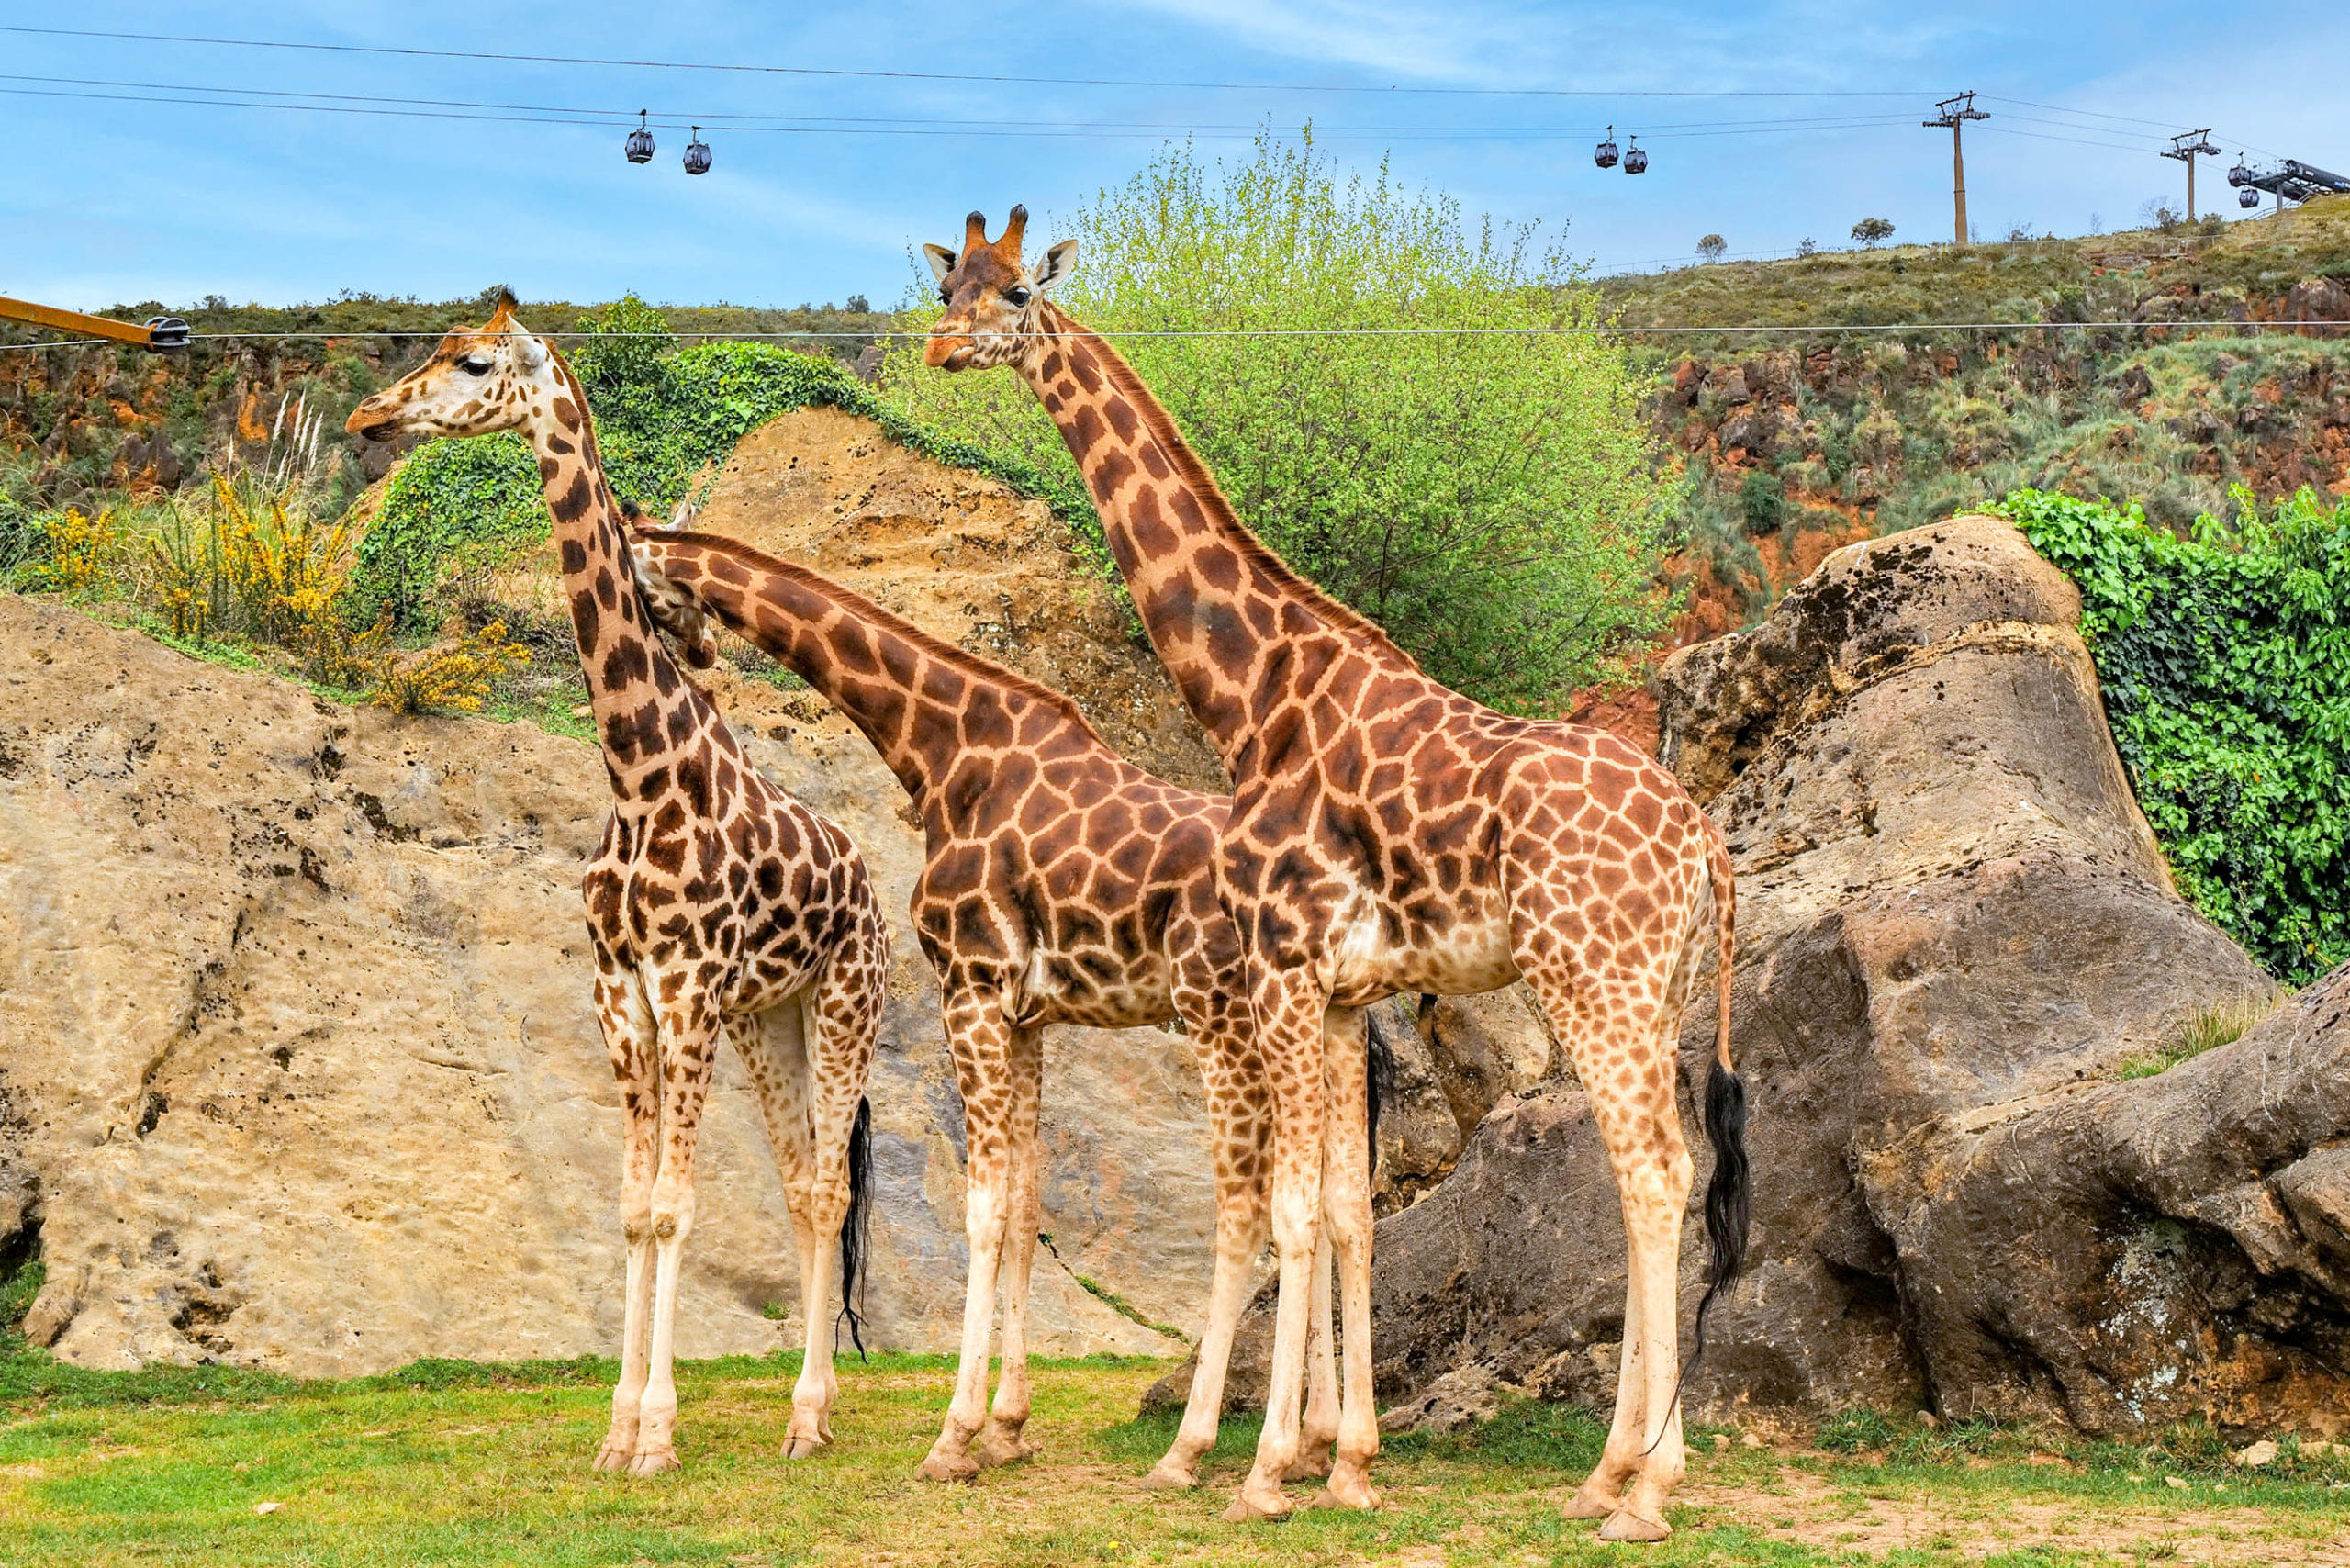 Witness these beautiful animals at the Cabarceno Natural Park